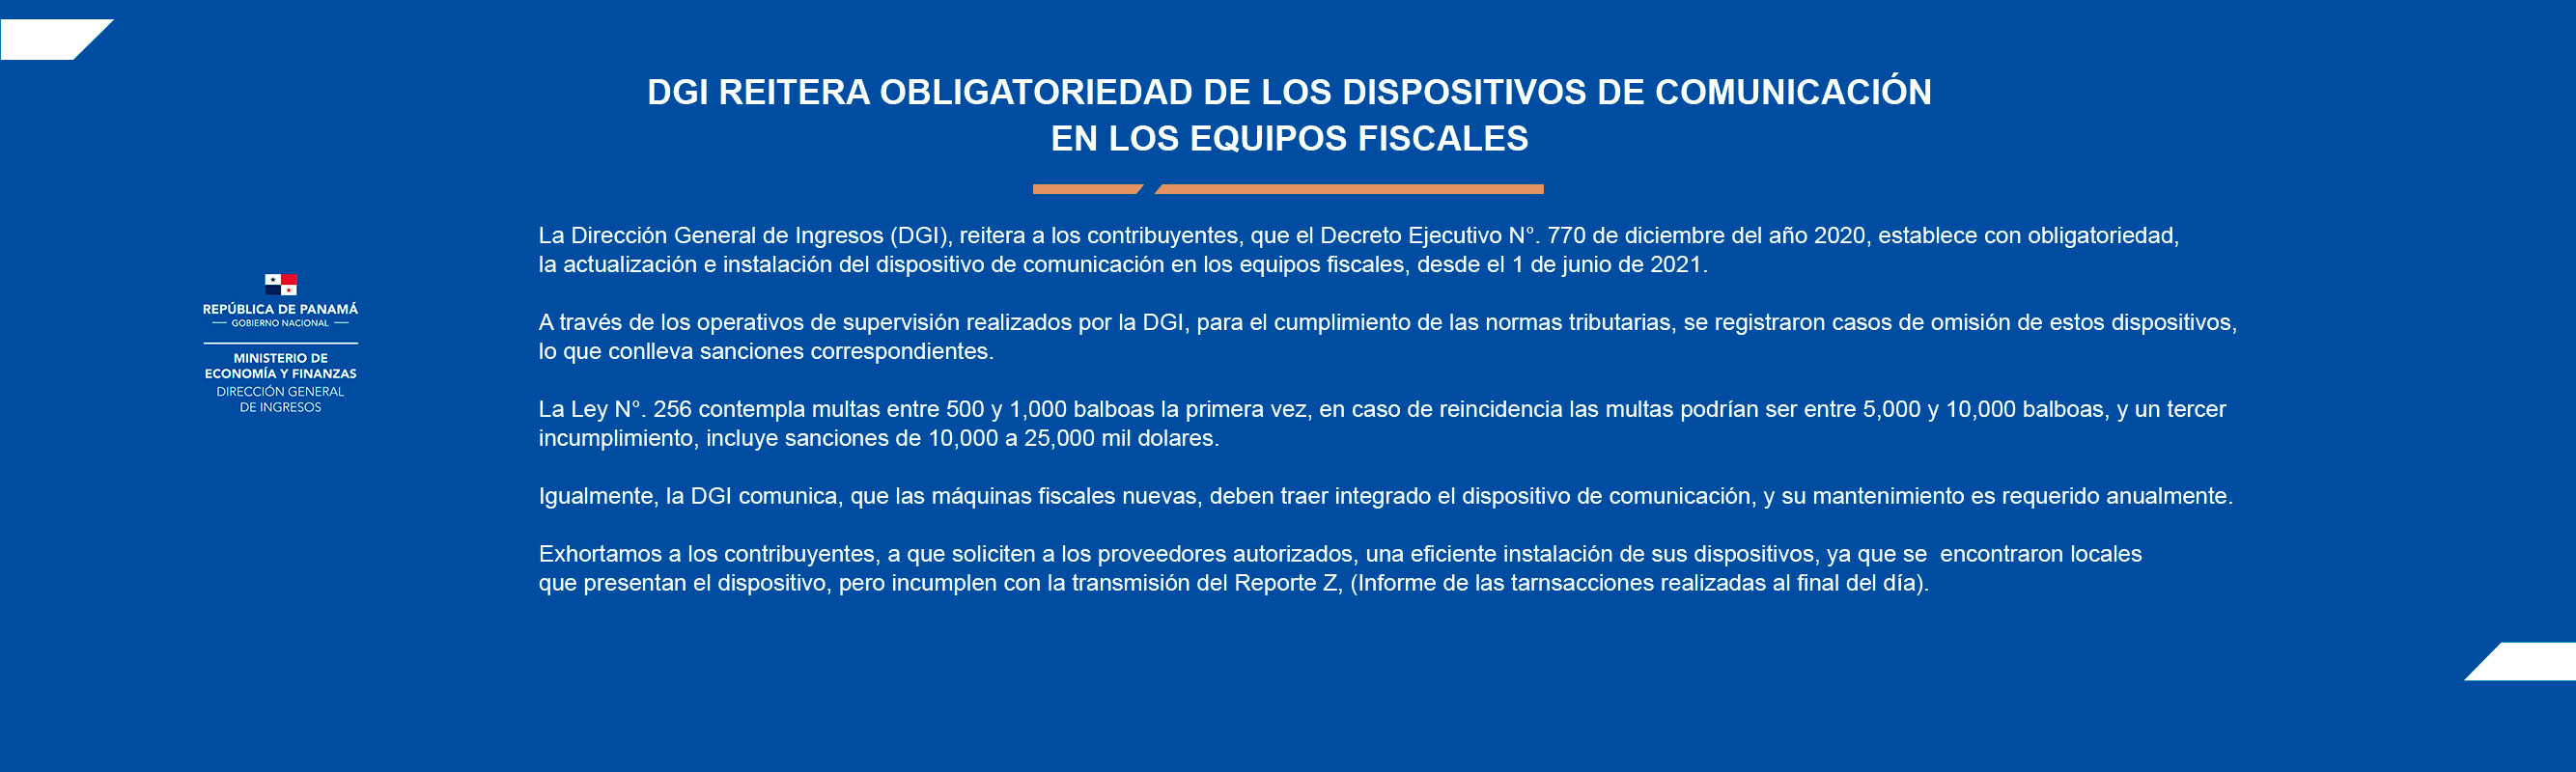 Equipos Fiscales